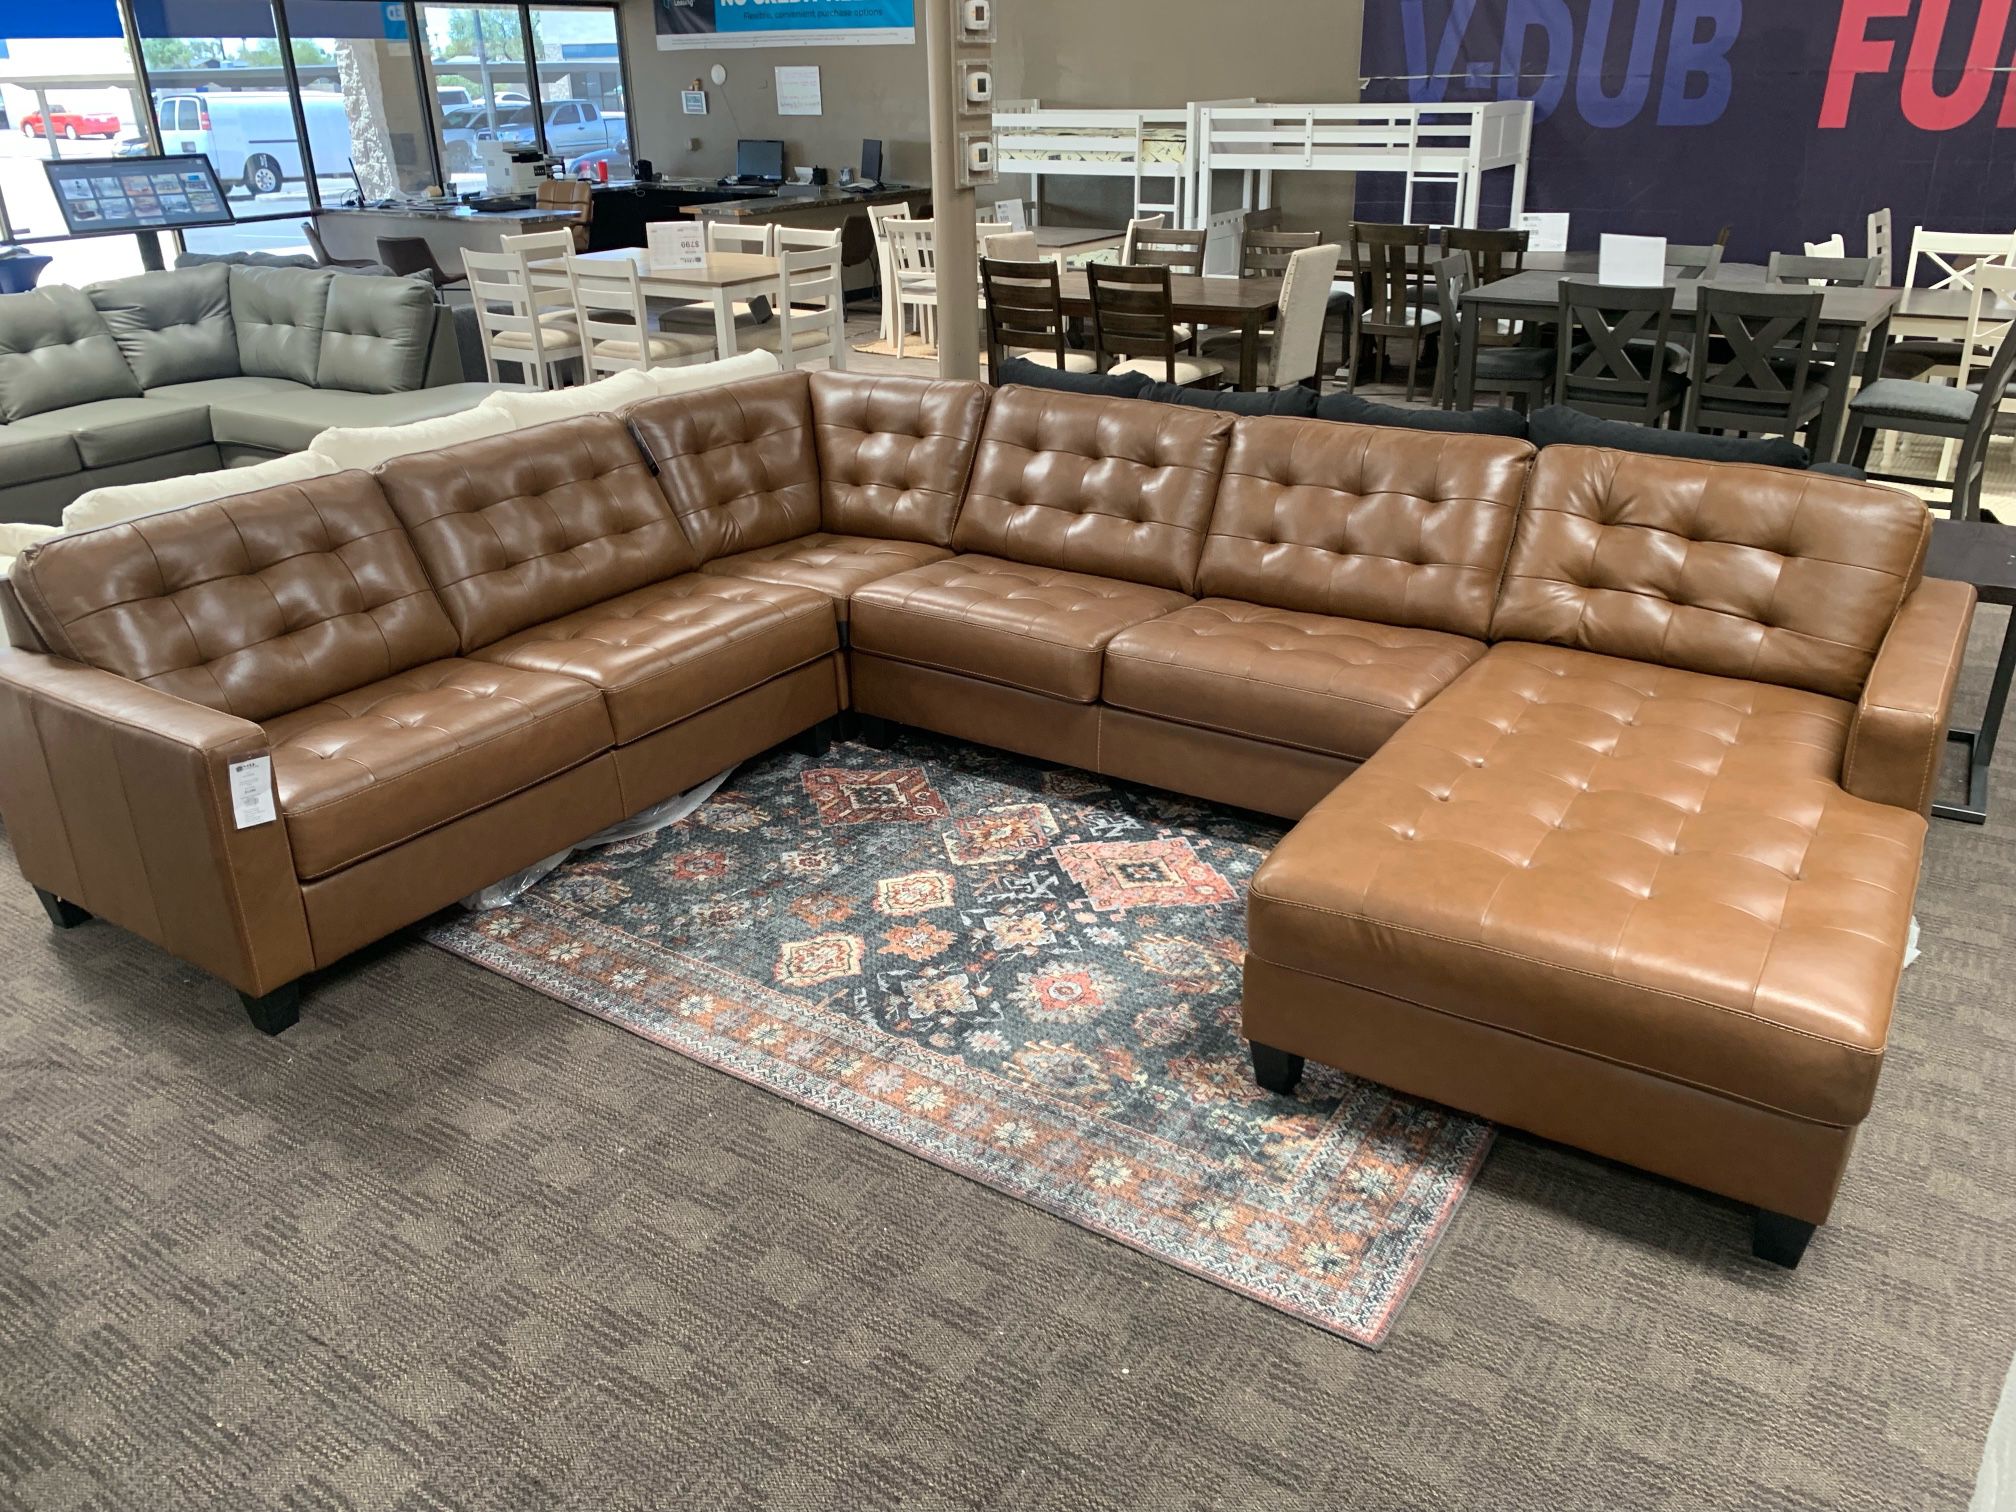 Leather Brown Sectional Couch